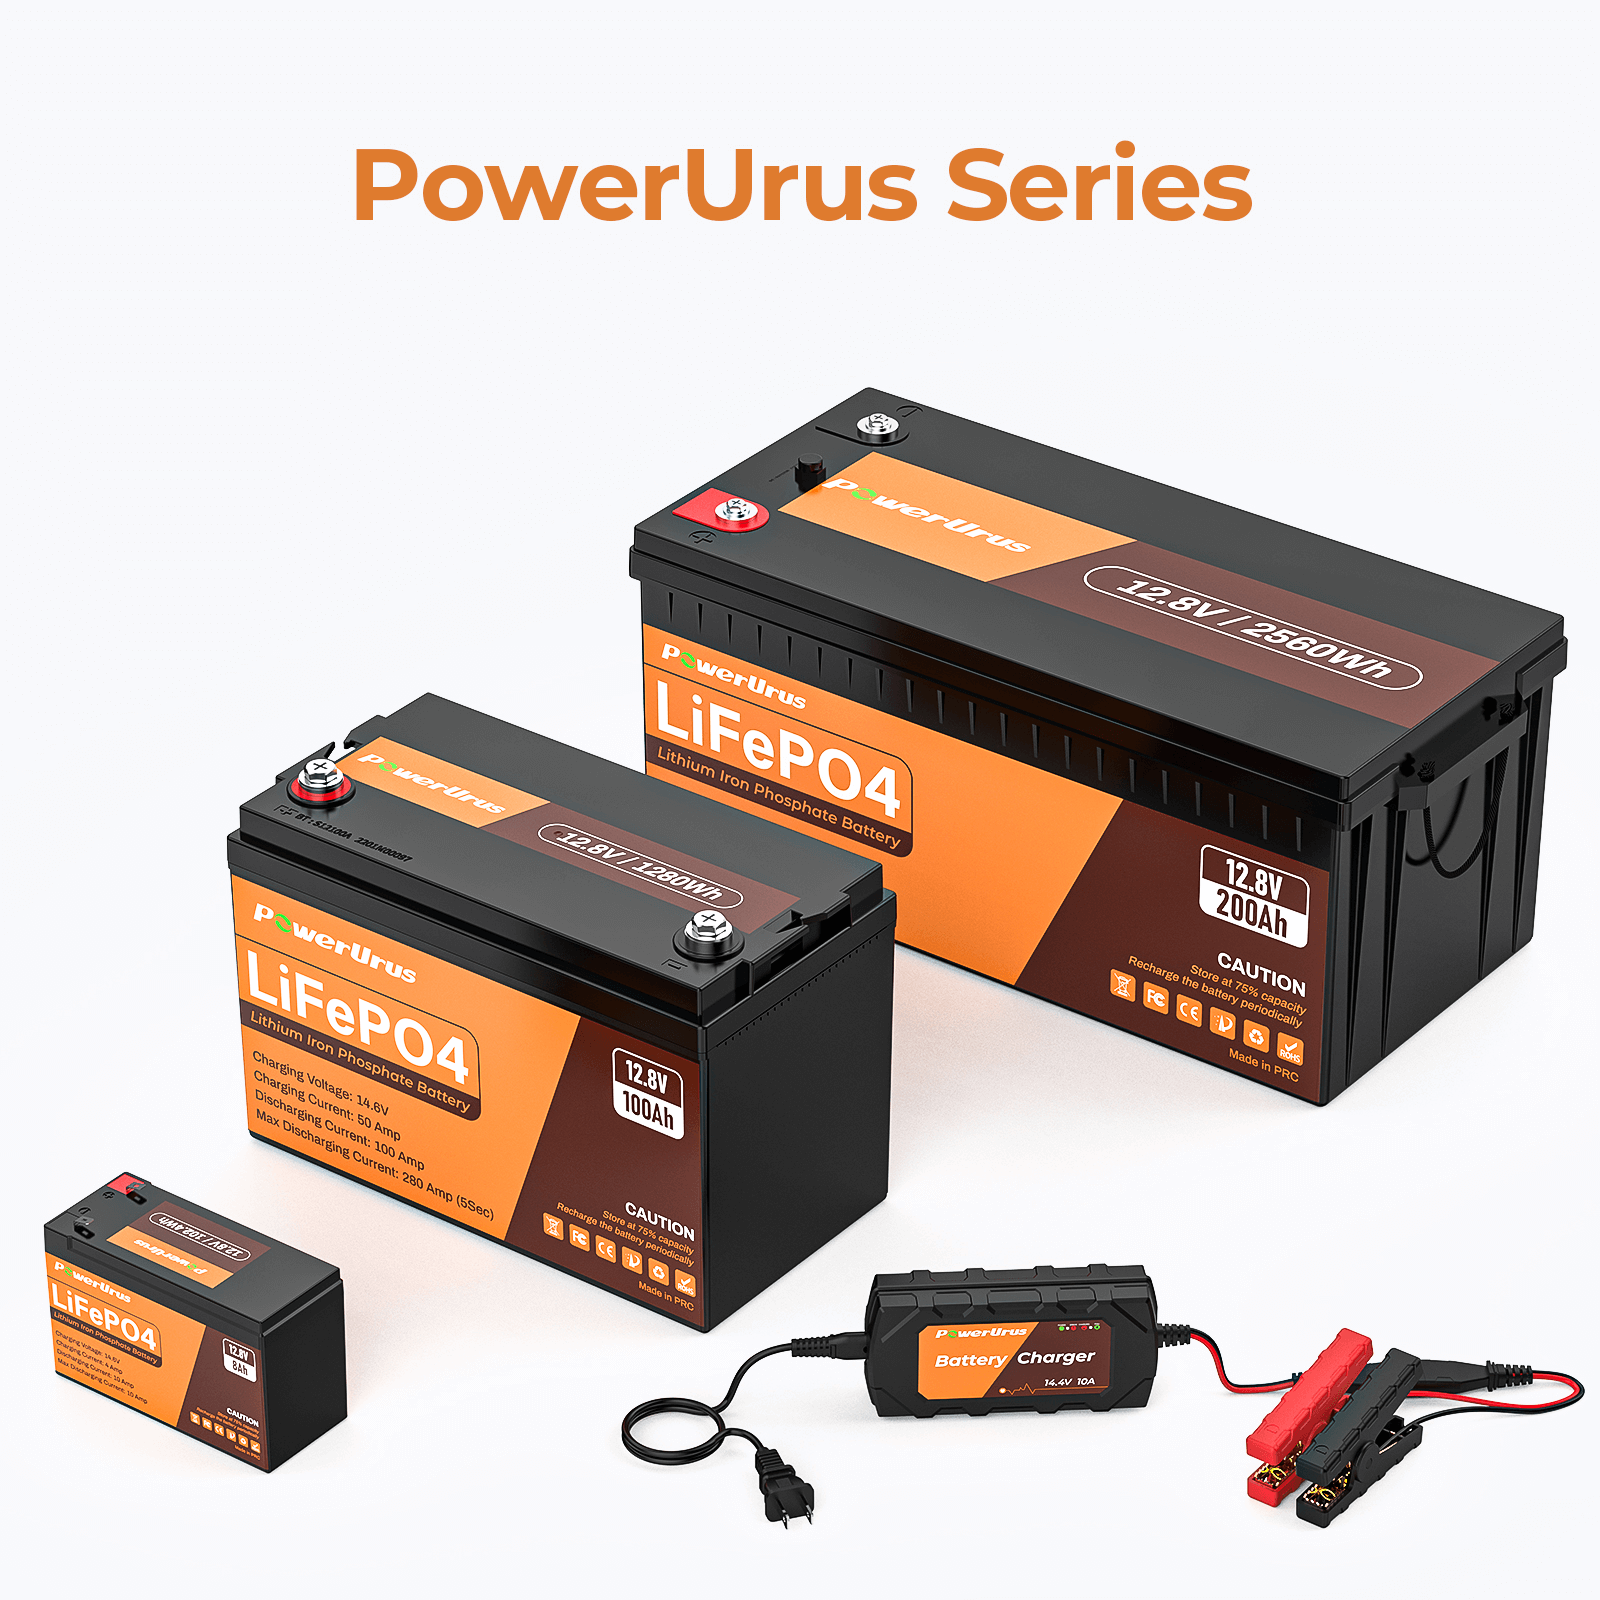 Chargeur 240W-10A pour batterie 12V Lithium Fer Phosphate